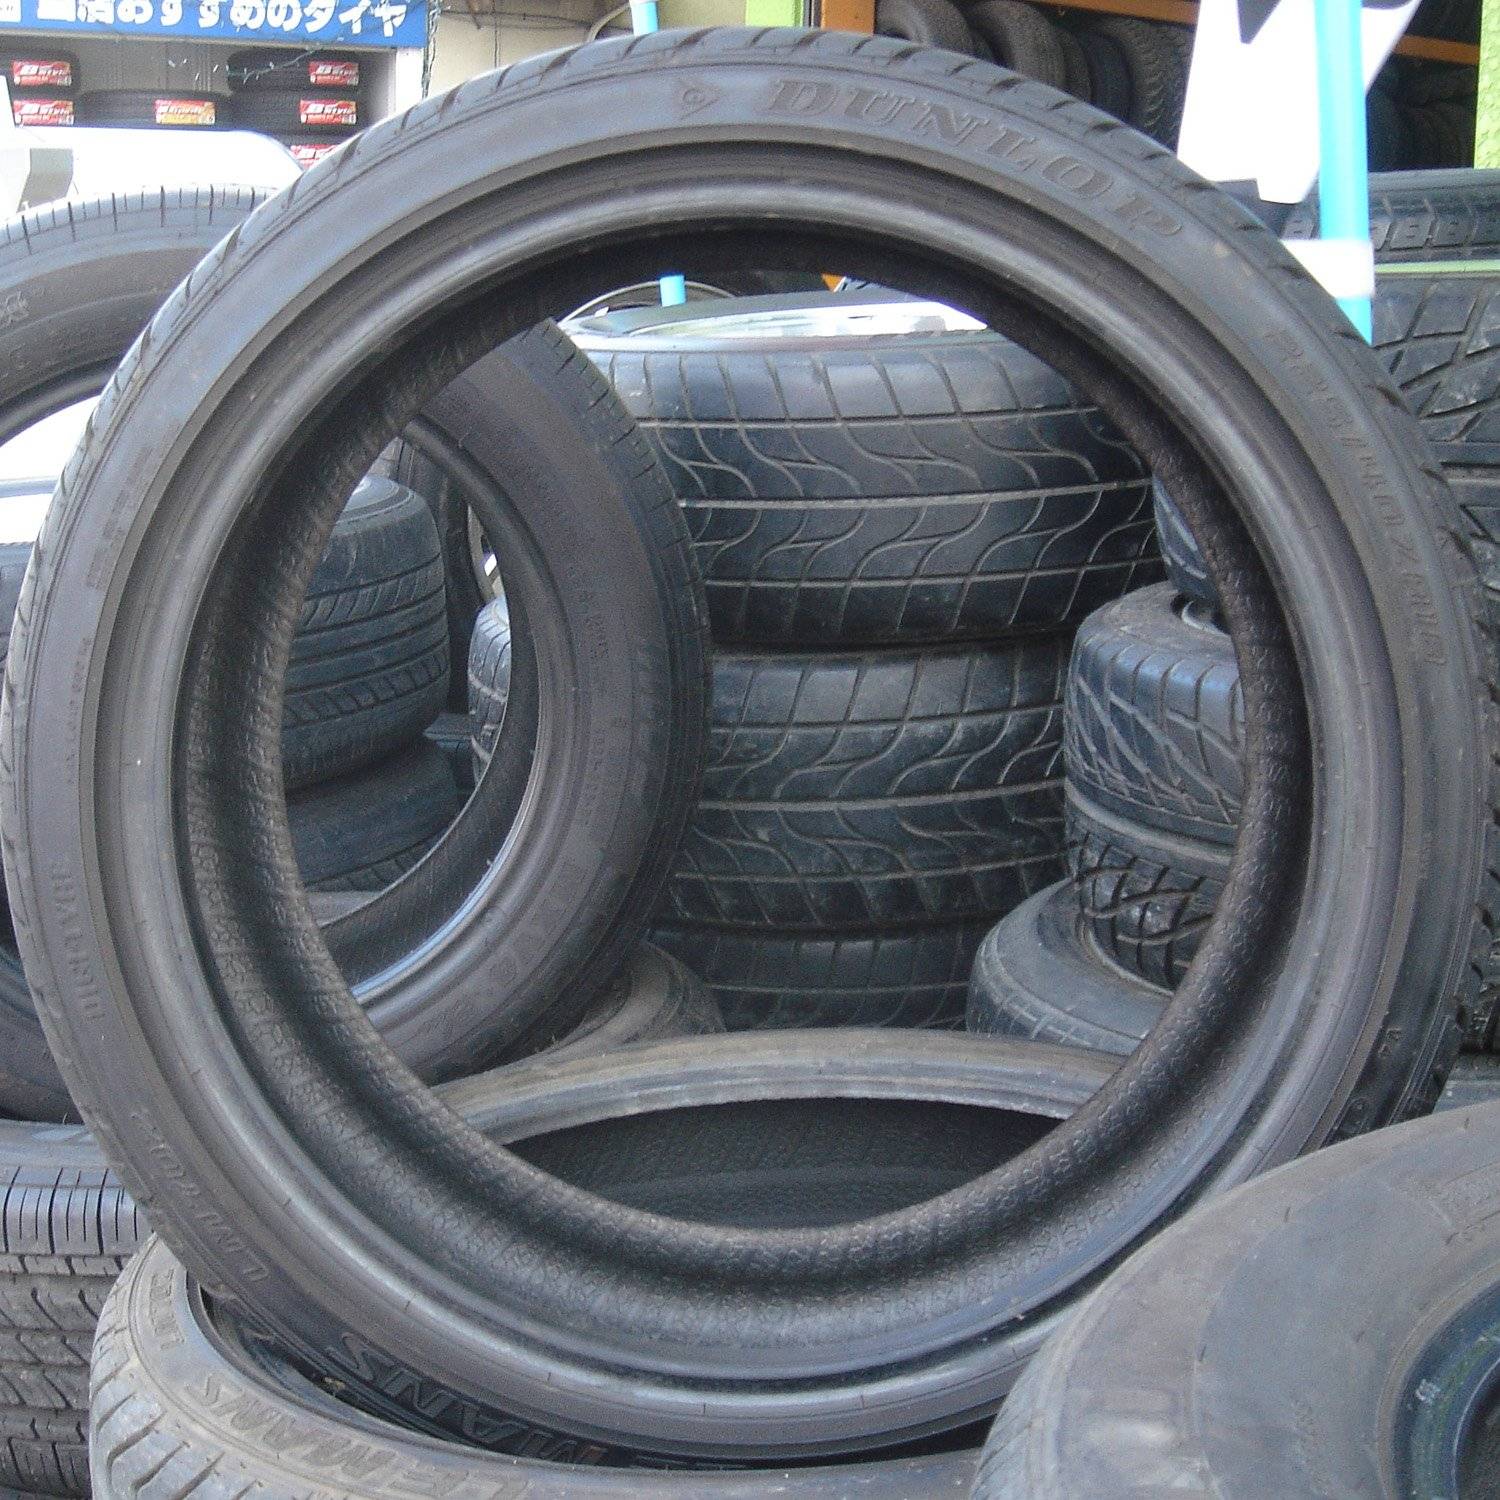 This image depicts tyres. This post is about how the court answered the question s to who owns the goodwill for a trademark-the seller or the manufacturer in a case. Click on the image to read the full post.